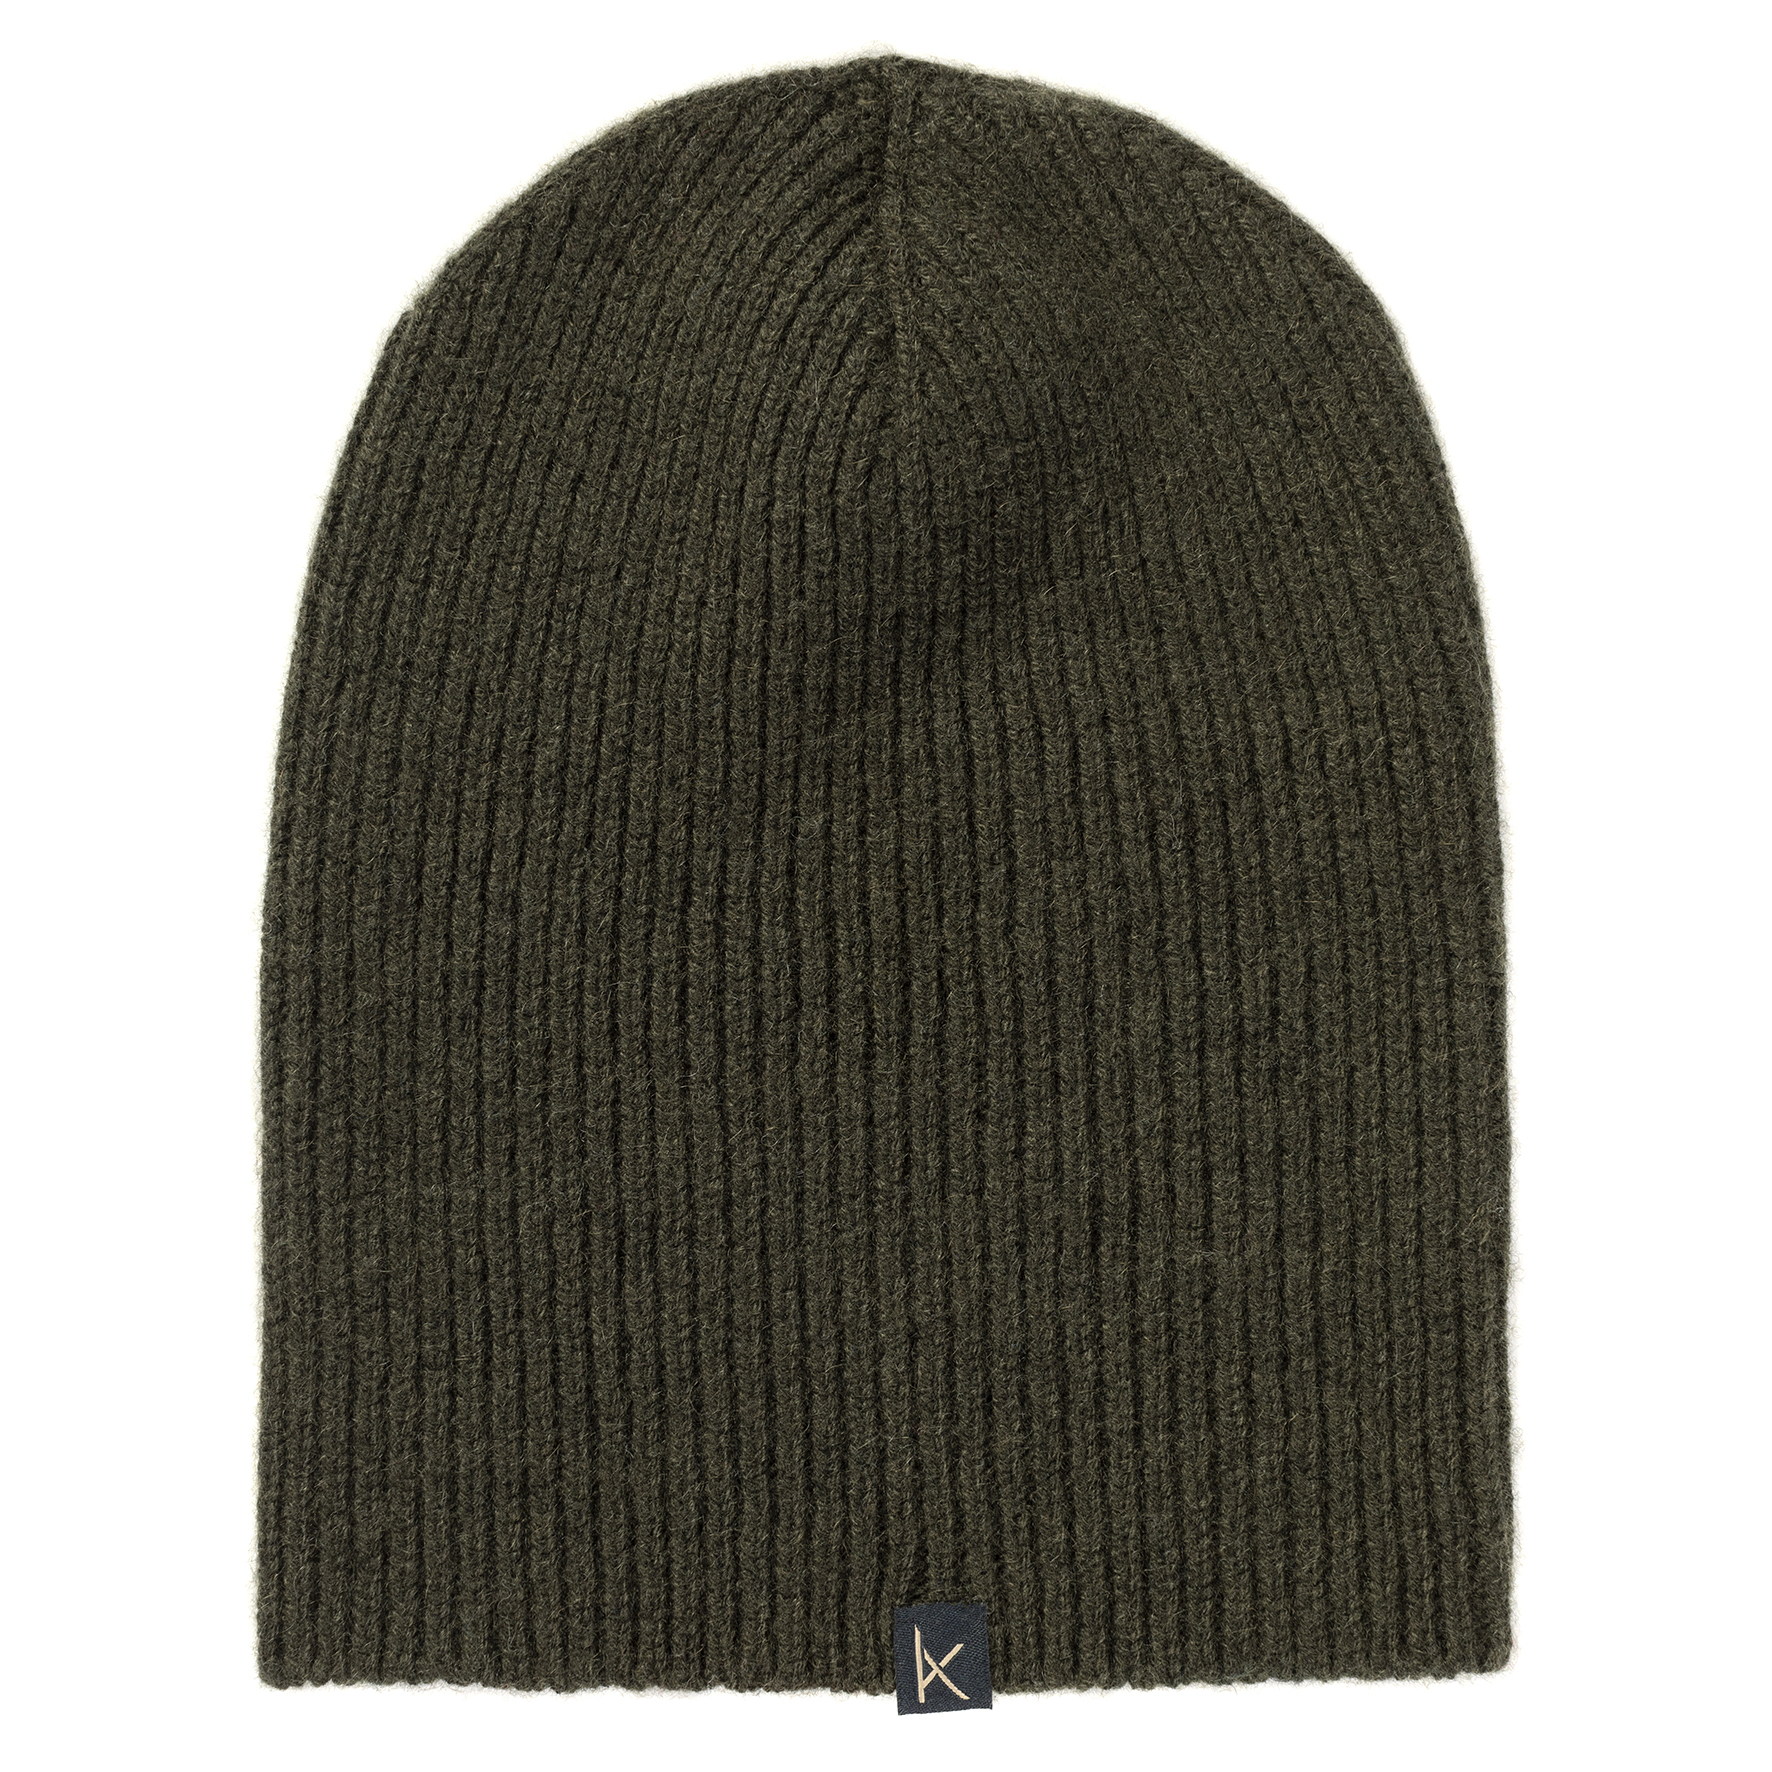 Military Green Deluxe Knitted Cashmere Beanie Hat